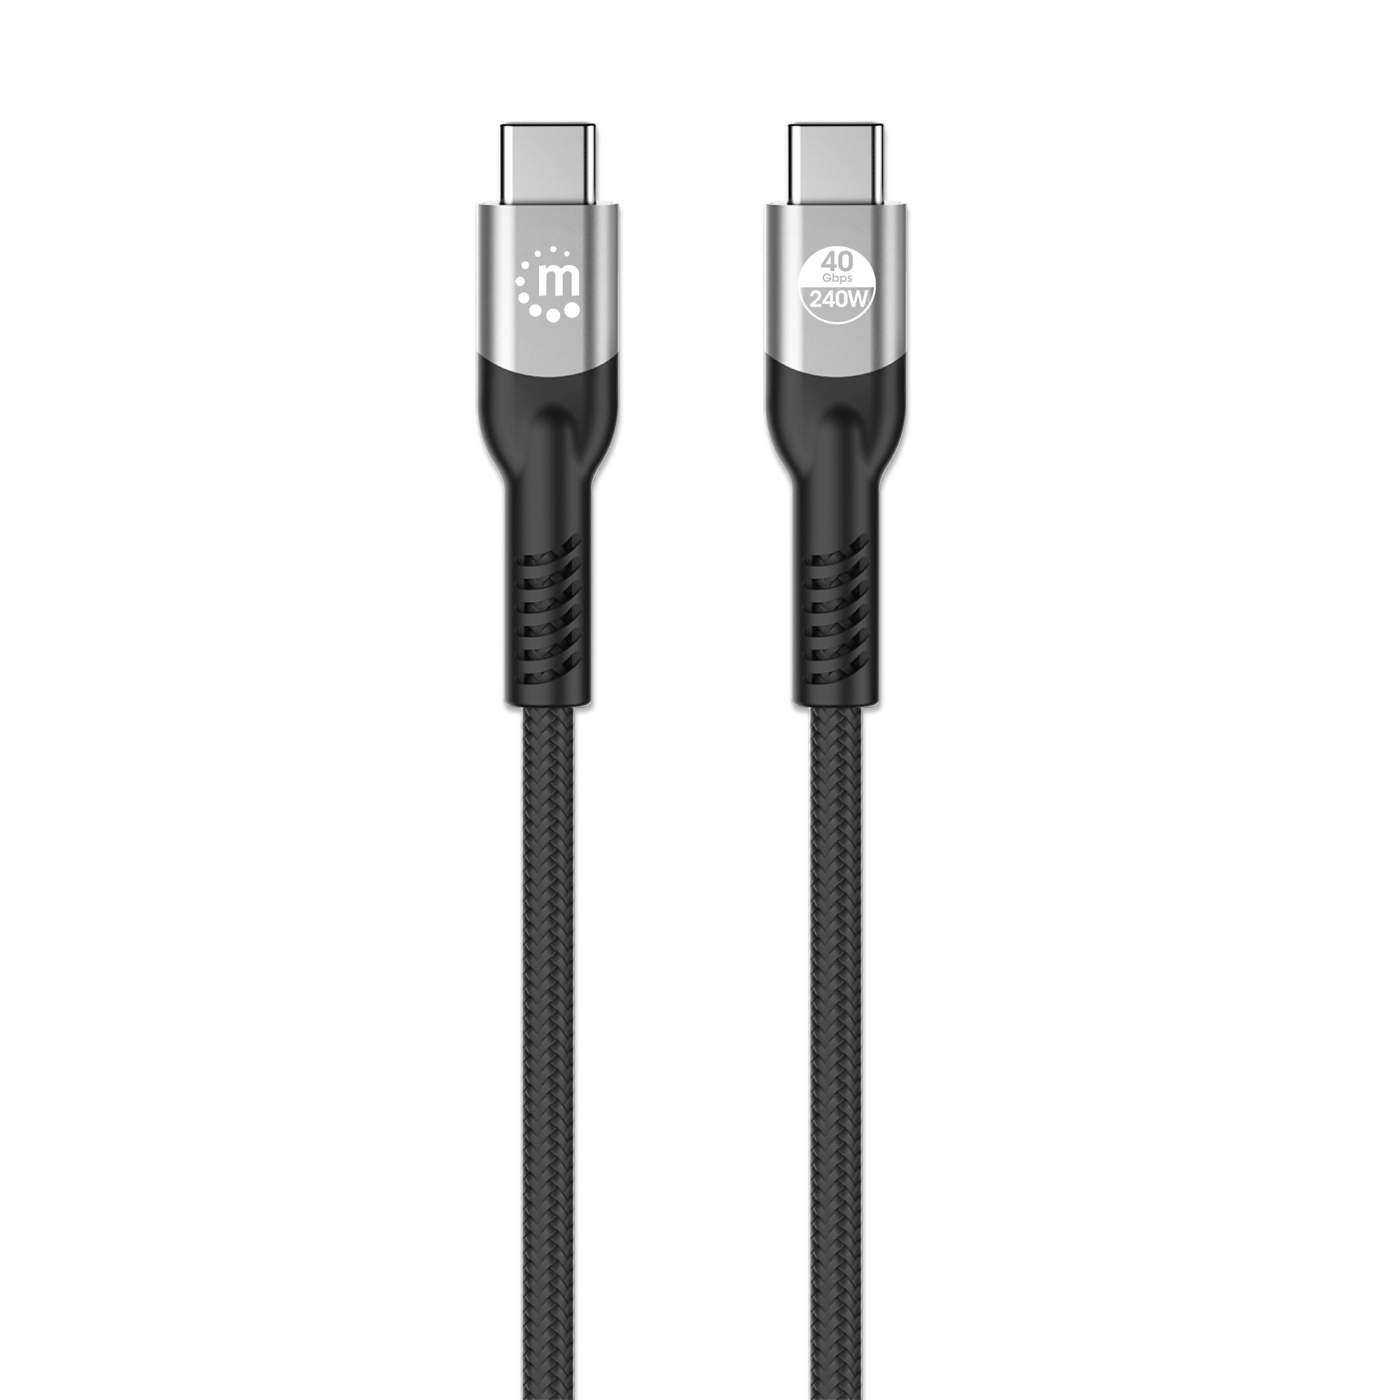  240W USB4 Cable, USB C to USB C Cable Fast Charging Compatible  Thunderbolt 4/3 Cable, Support 8K/6K@60Hz & 40Gbps Data Transfer for iPhone  15 Pro MacBook Pro/Air Samsung eGPU Docking GaN